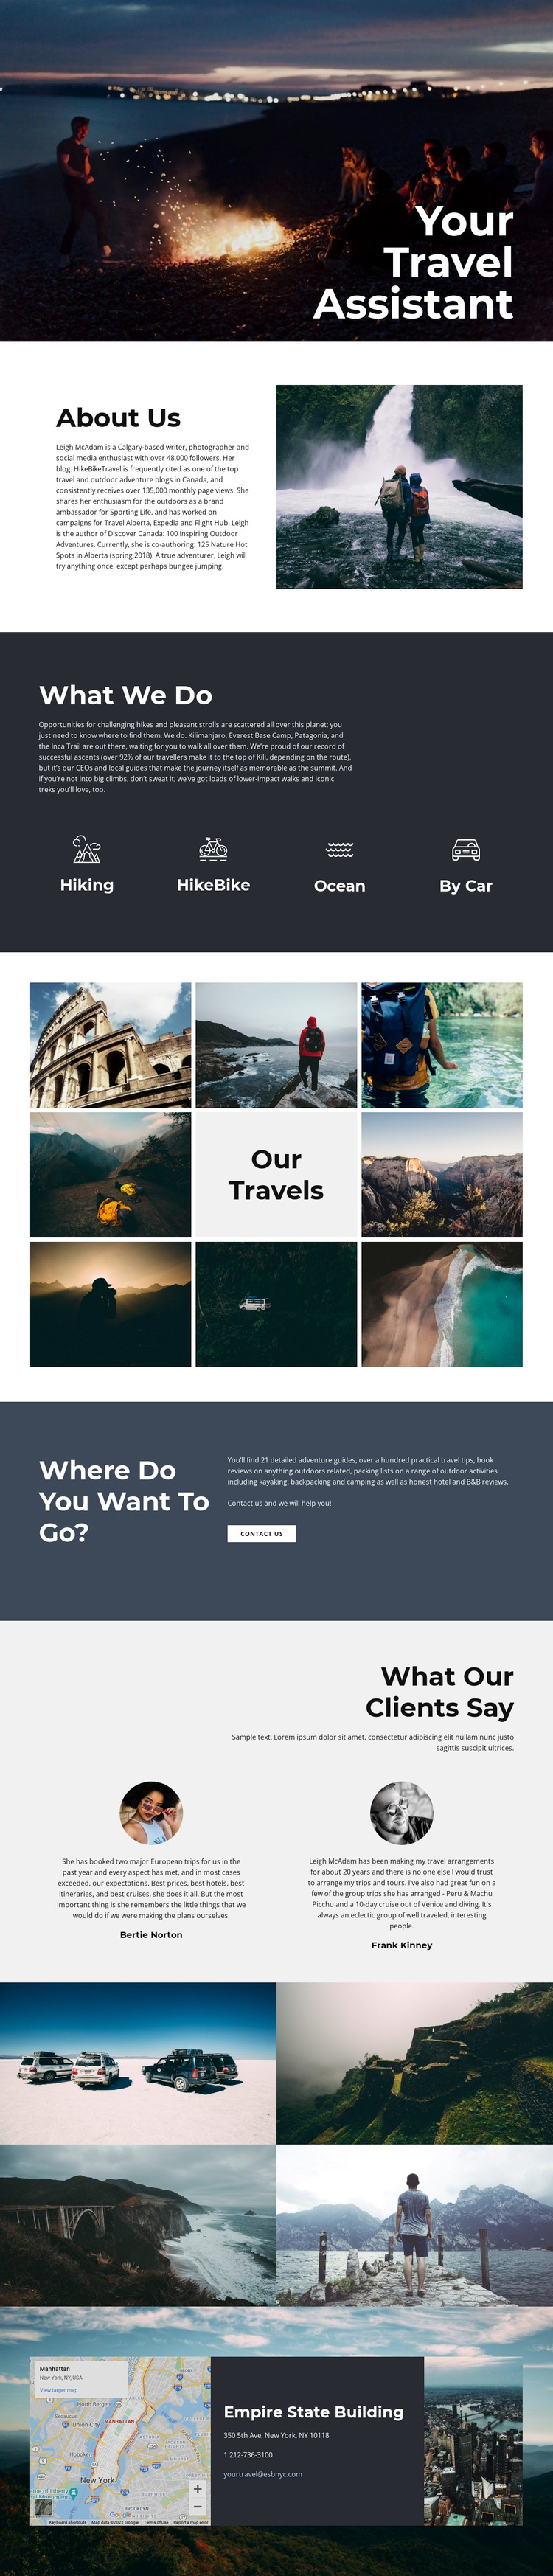 Travel Assistant Template